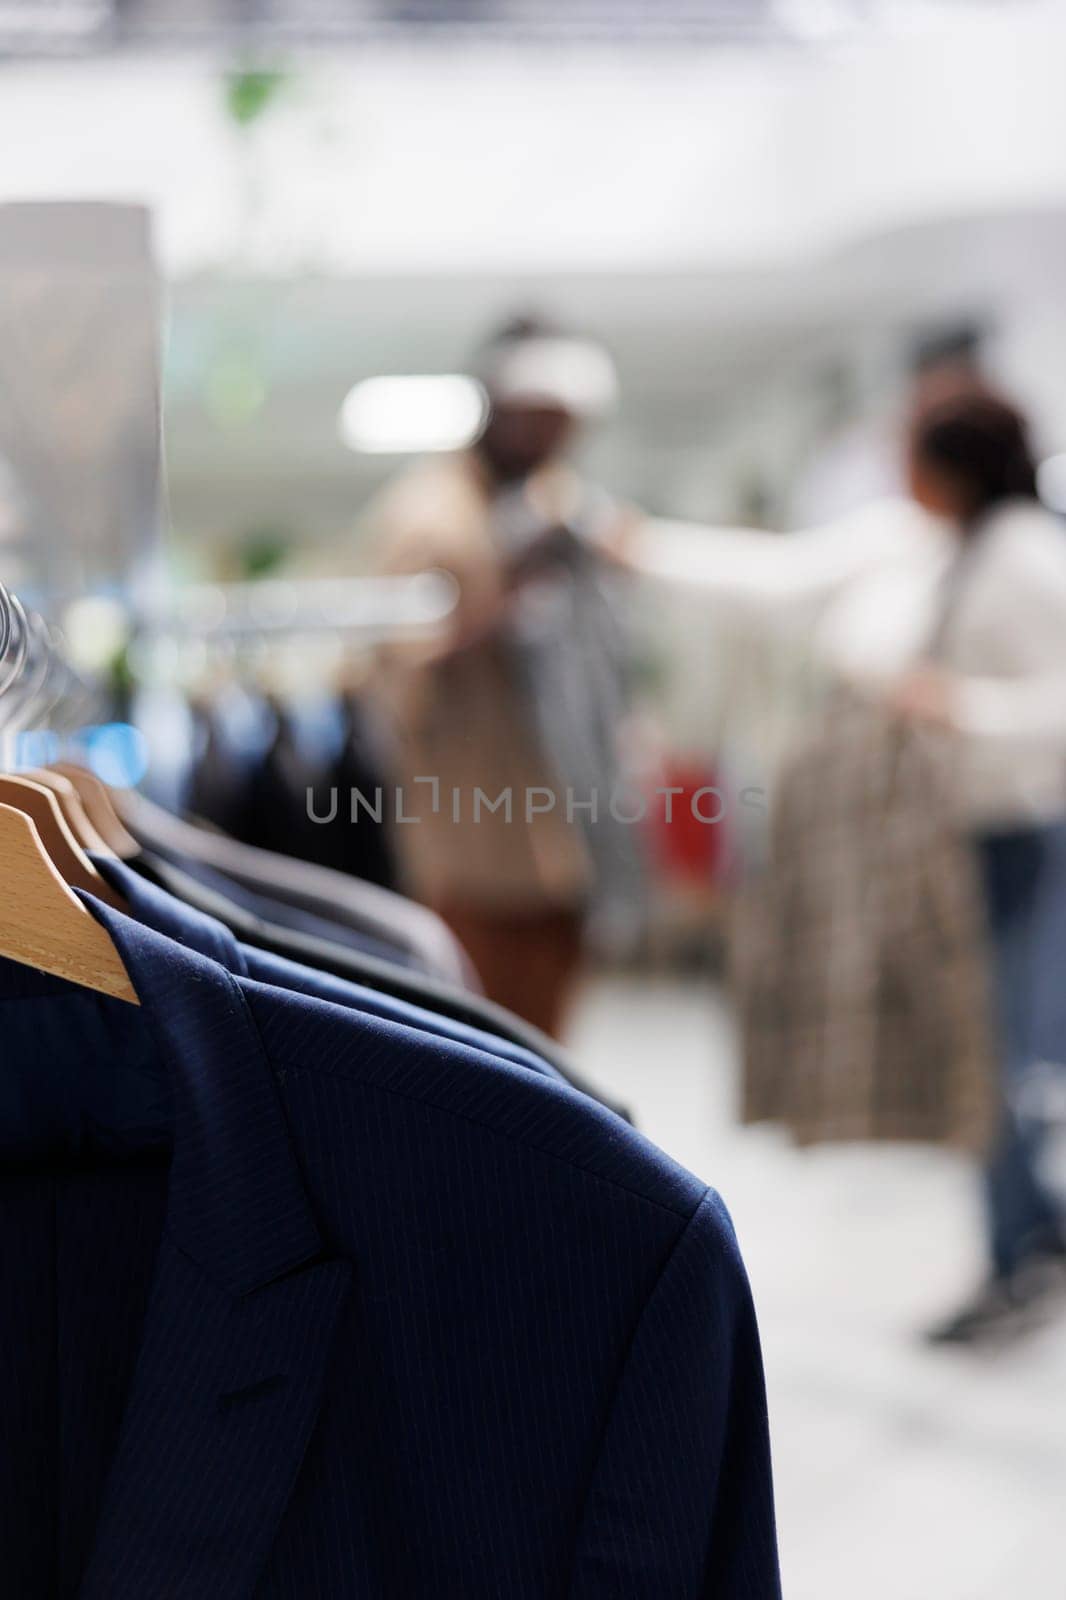 Trendy shirts hanging on rack in shopping mall with couple choosing clothes on blurred background. Casual menswear apparel on hangers in fashion boutique close up selective focus